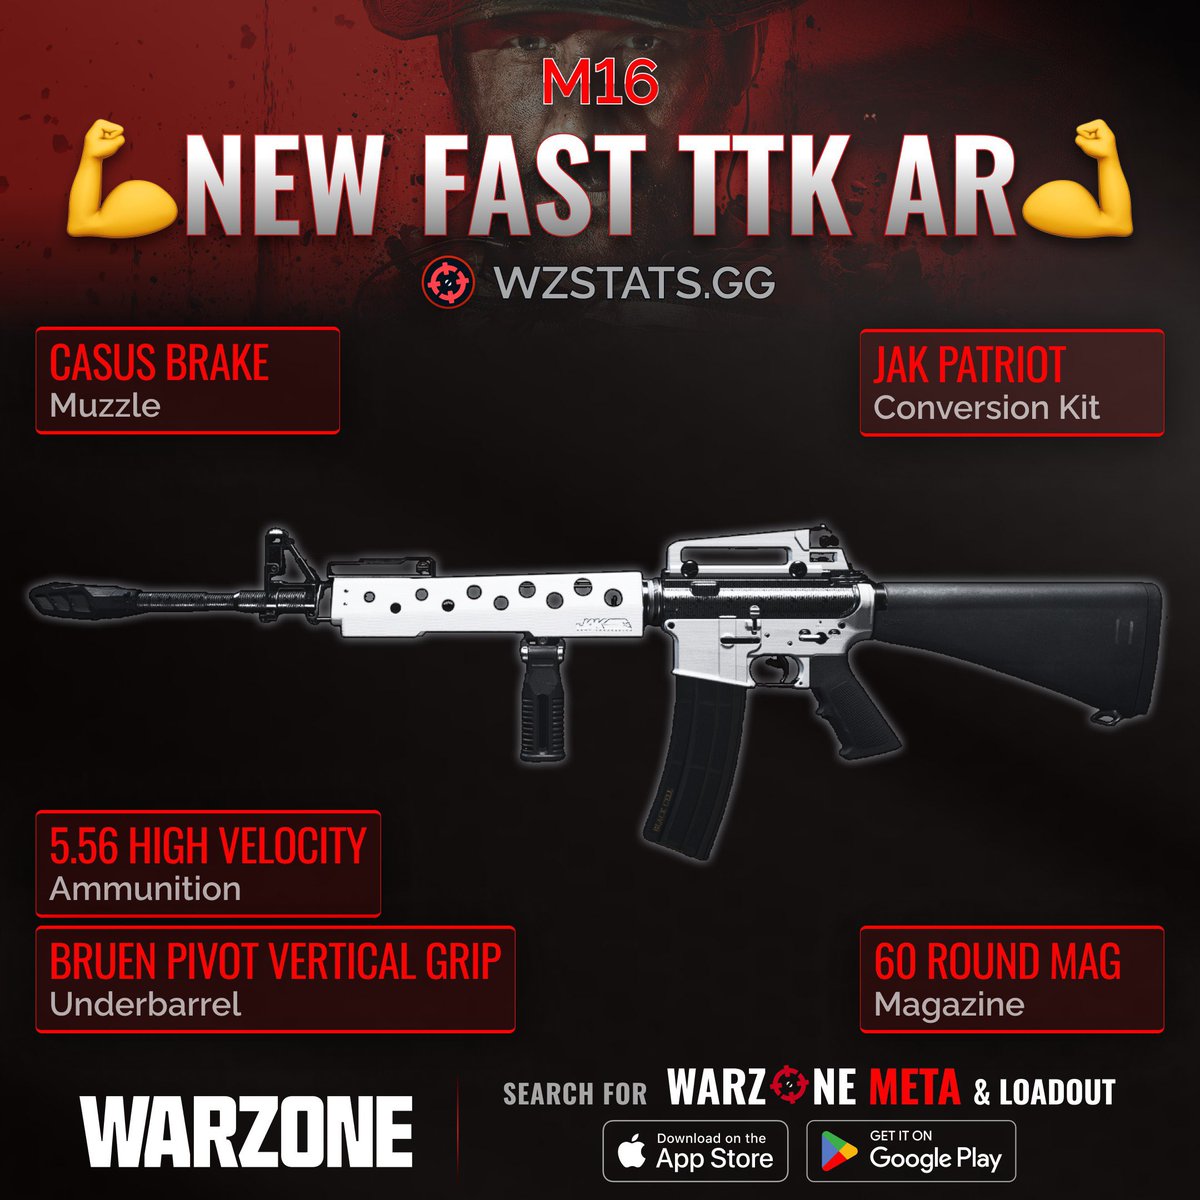 ‼️🚨 NEW AR HAS A VERY FAST TTK 🚨‼️

🆕 The Full-Auto Conversion Kit for the M16 is AMAZING in #Warzone! 🤩

💥 It has one of the Fastest TTKs in the game!

📊 1st Range TTK (0-24m): 670ms
📊 2nd Range TTK (24-48m): 745ms
📊 Last Range TTK (48m+): 895ms

This is now One of the